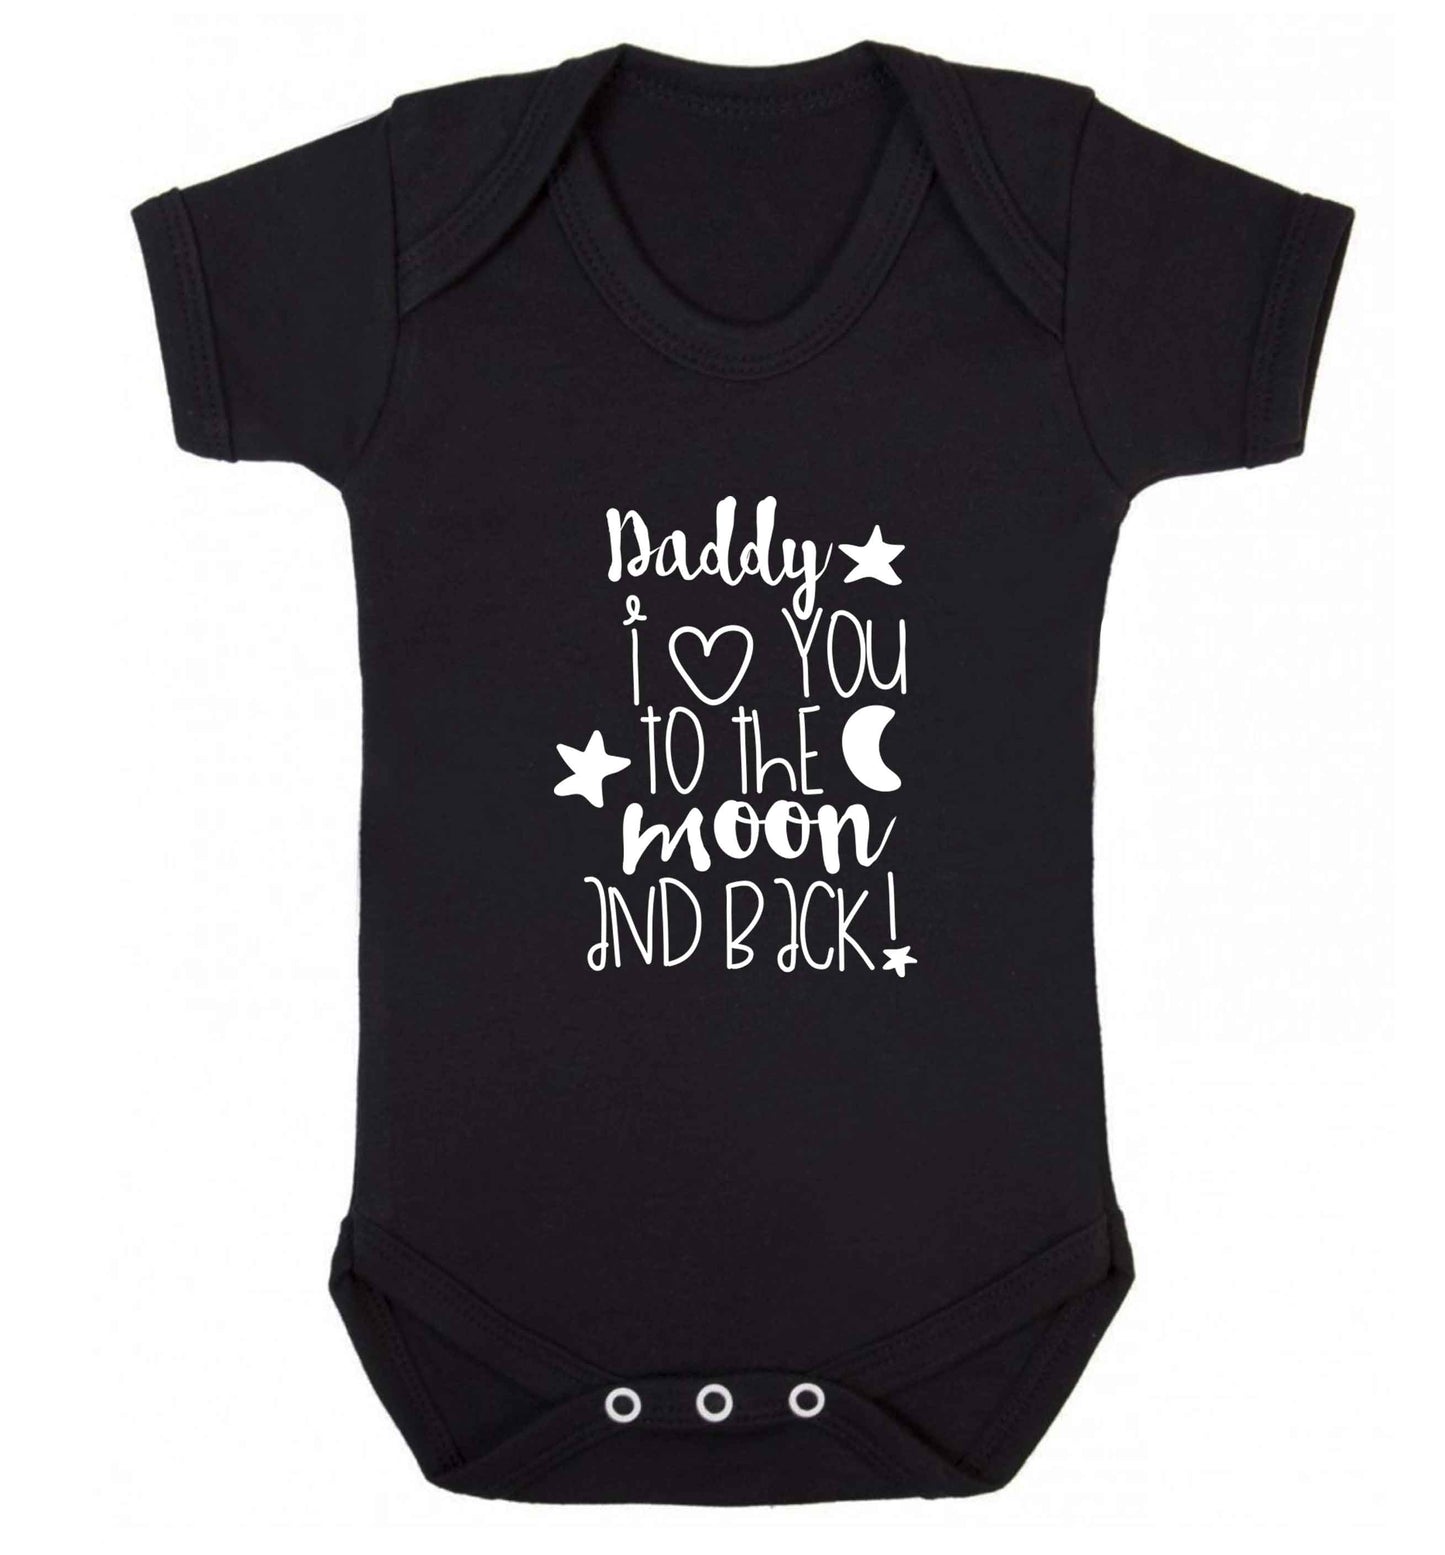 Daddy I love you to the moon and back baby vest black 18-24 months